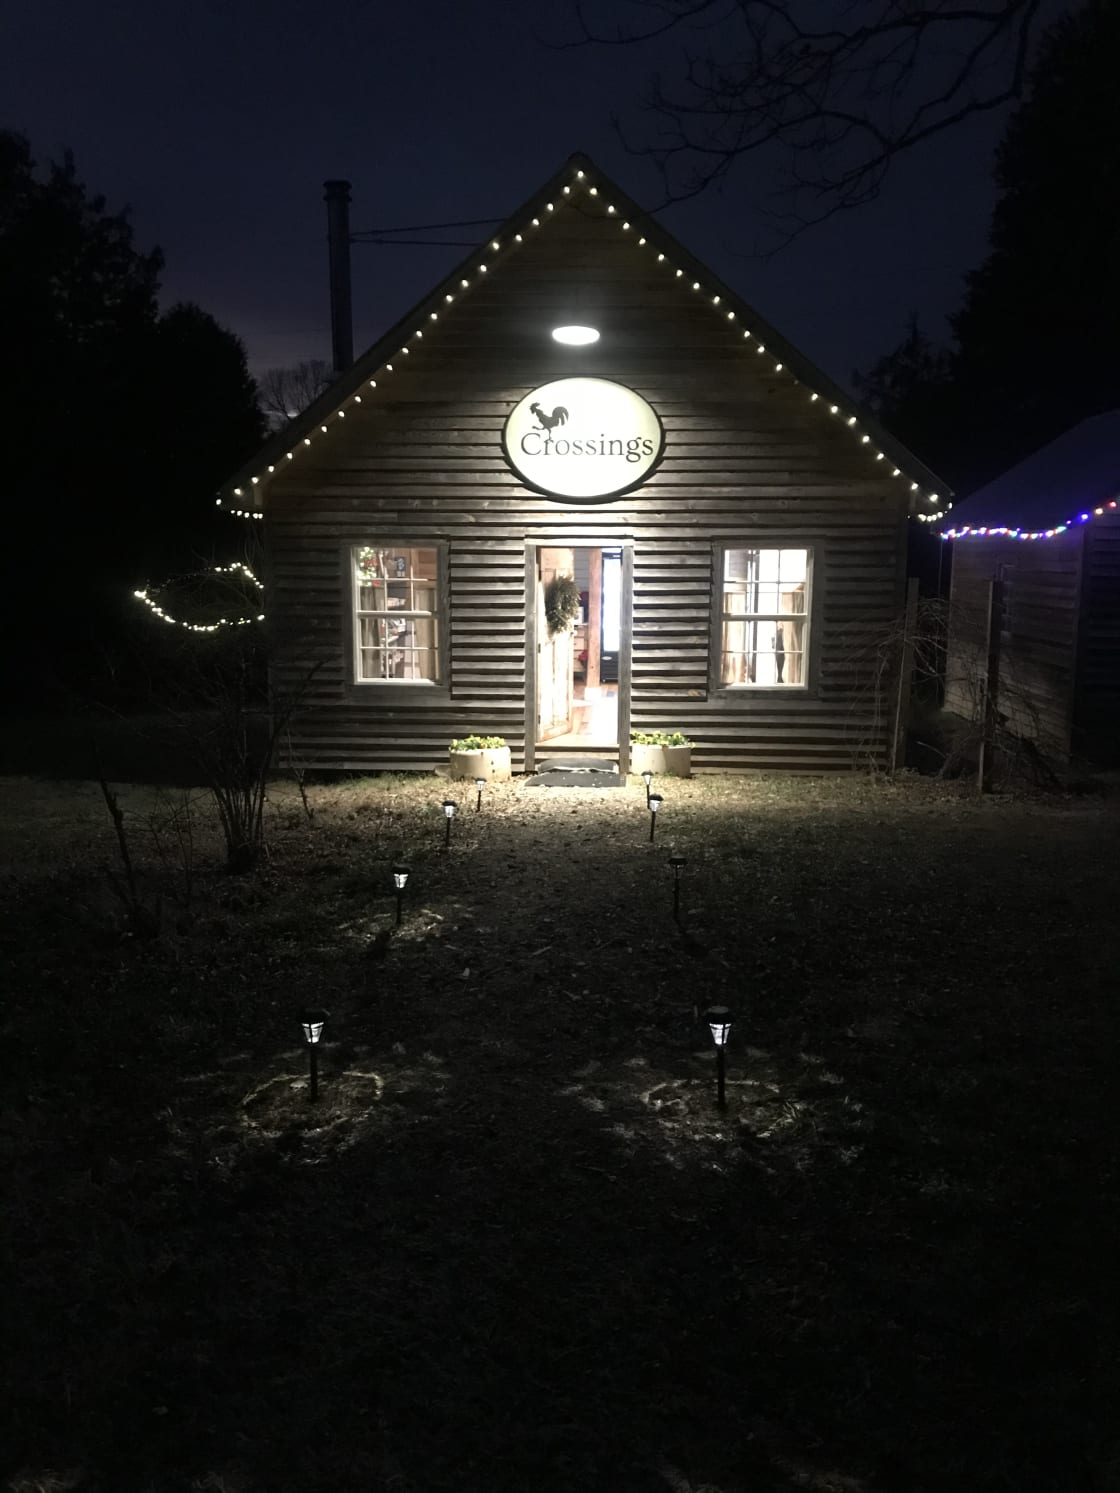 Night light and solar path lights allow safe journey into the Farm Store at night. 